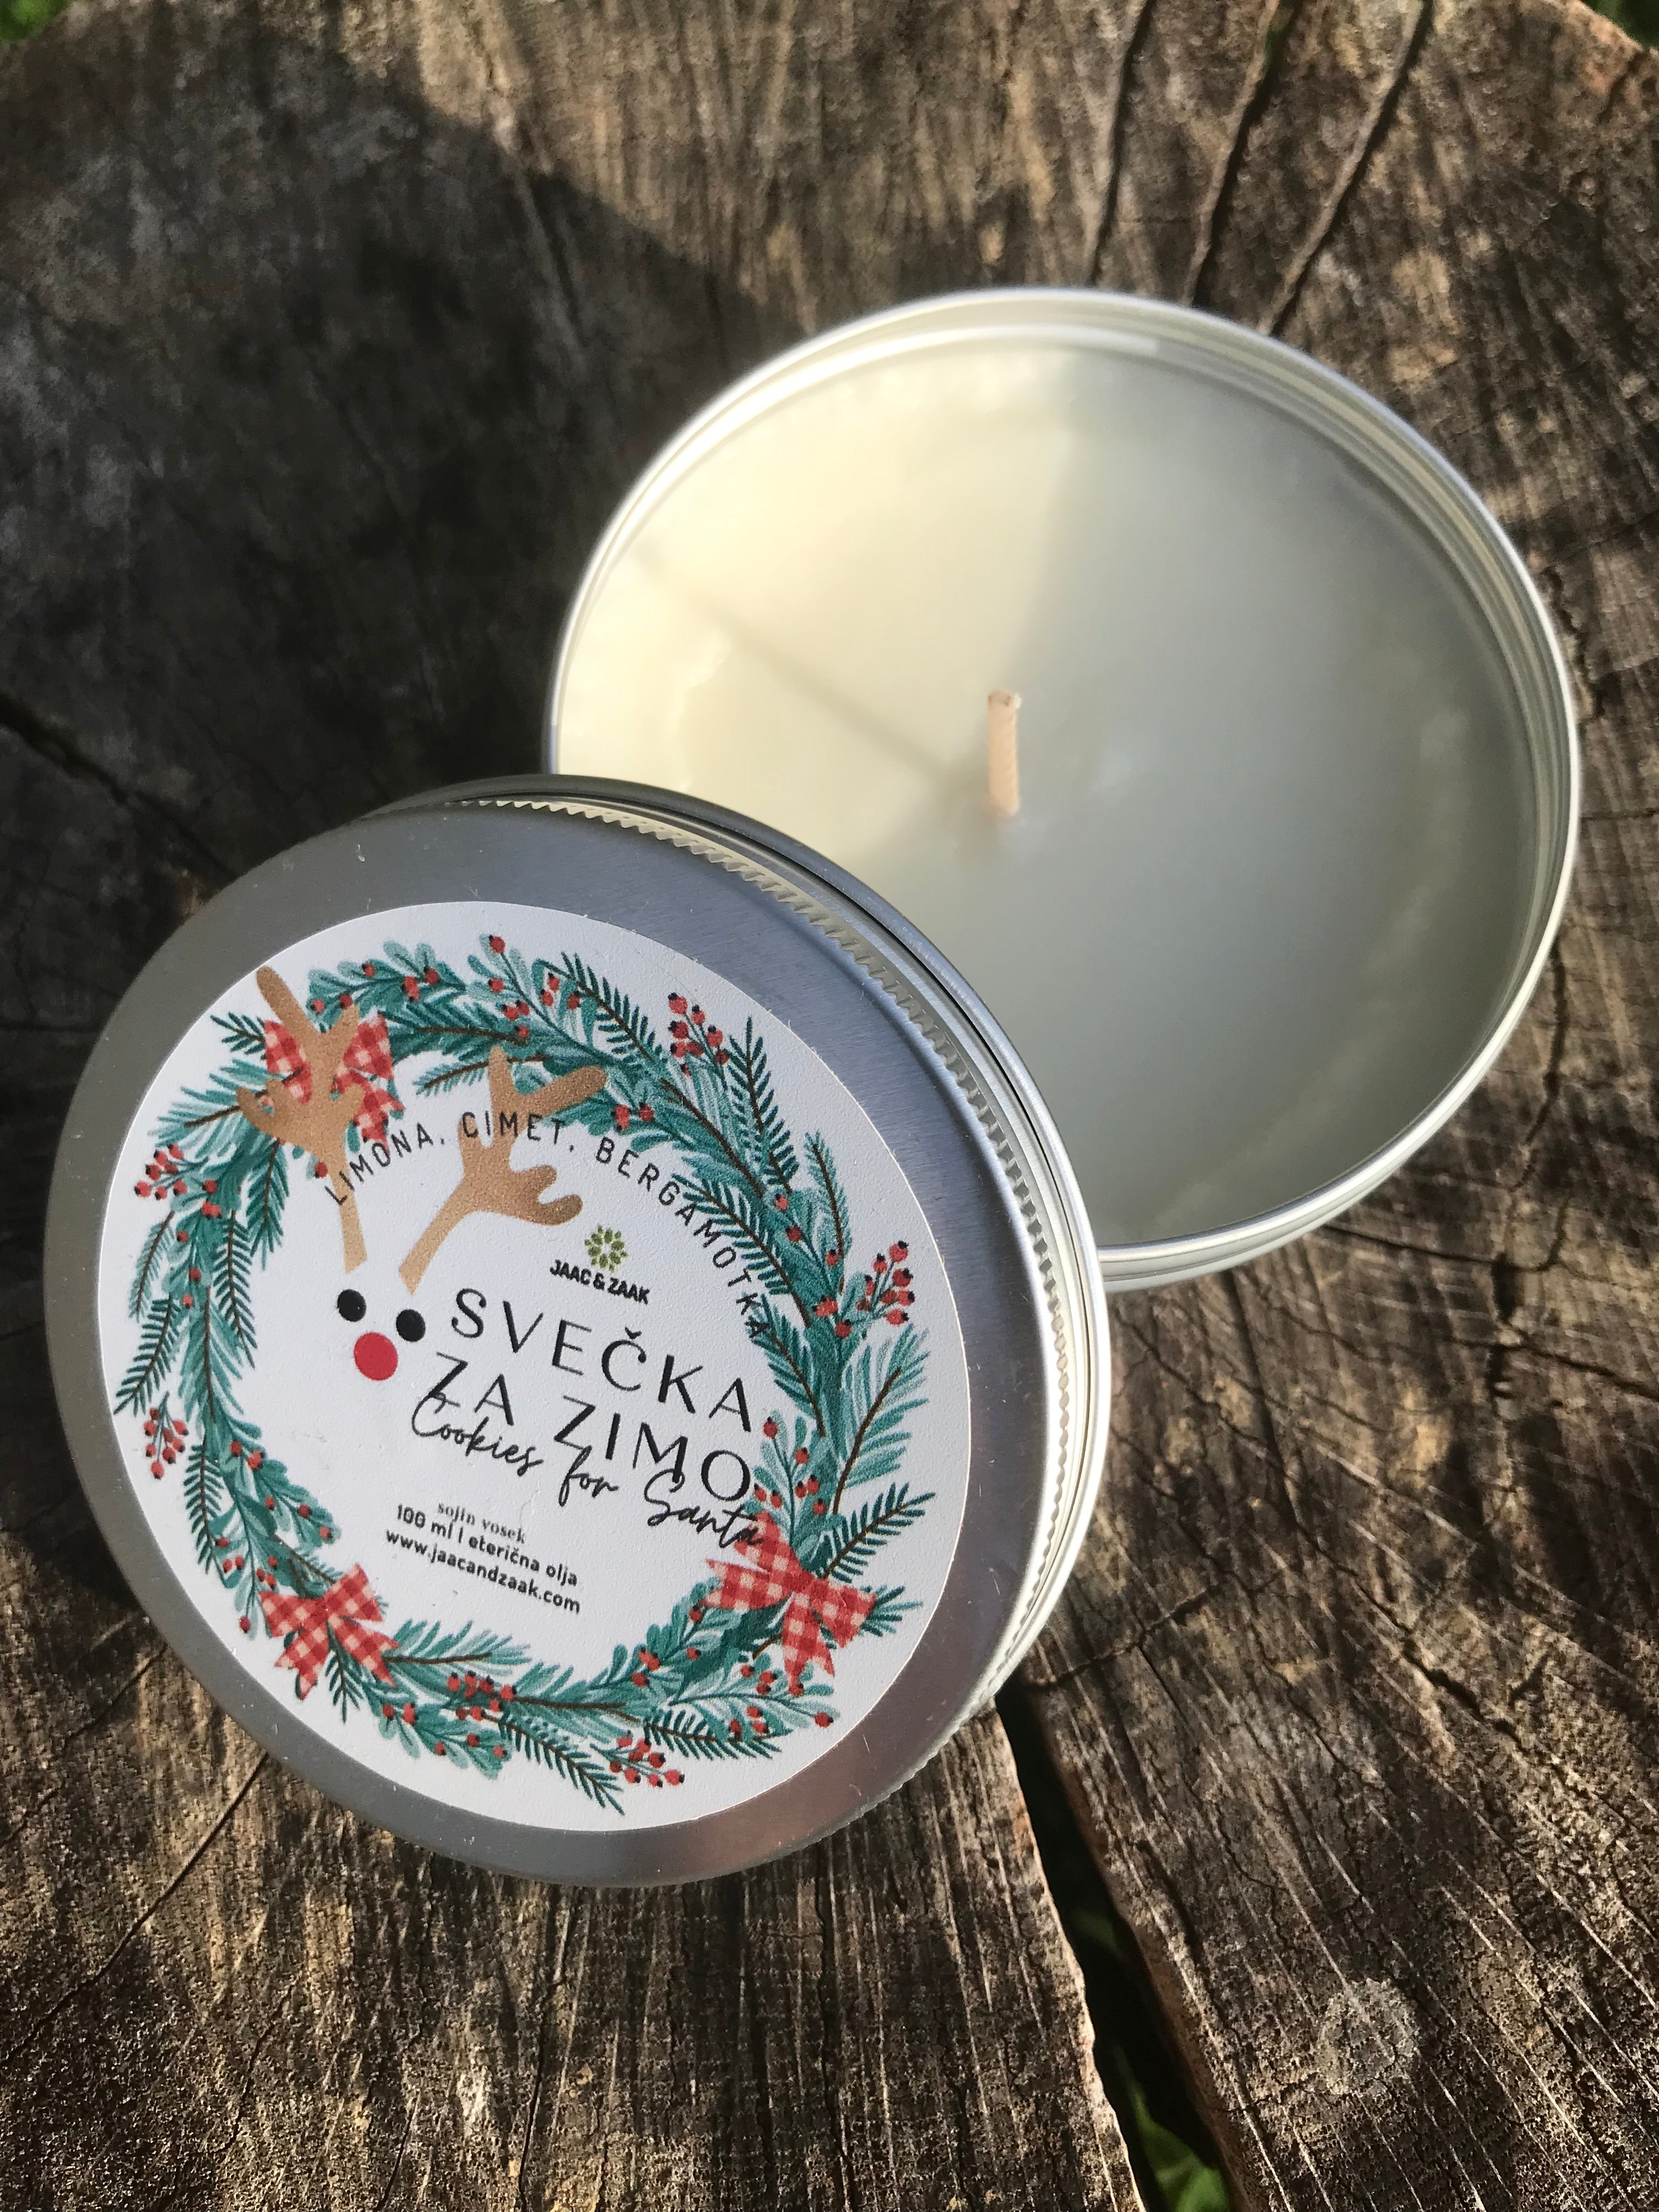 HYGEE Gift - Christmas candle + Socks Uncle Pine (2 size)